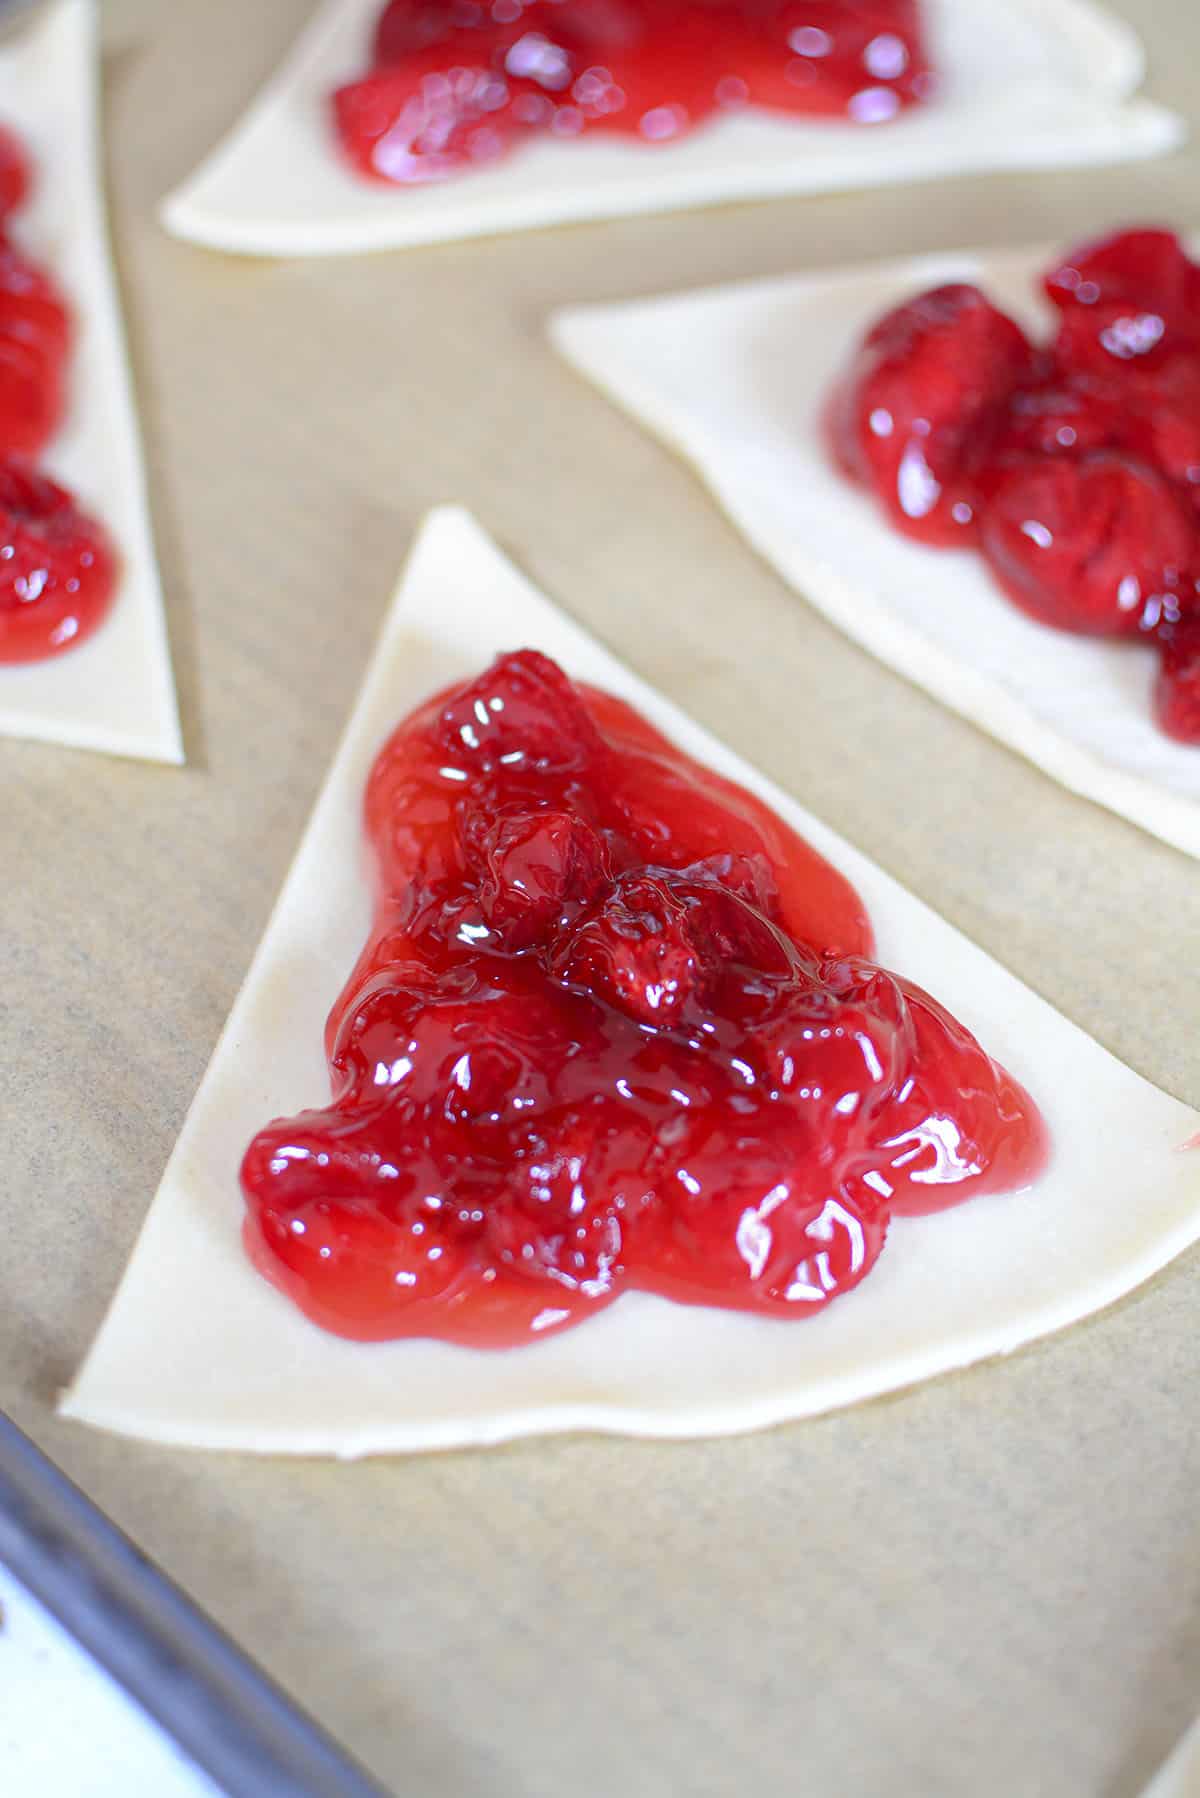 Strawberry rhubarb pie filling placed on a triangle of pie pastry.